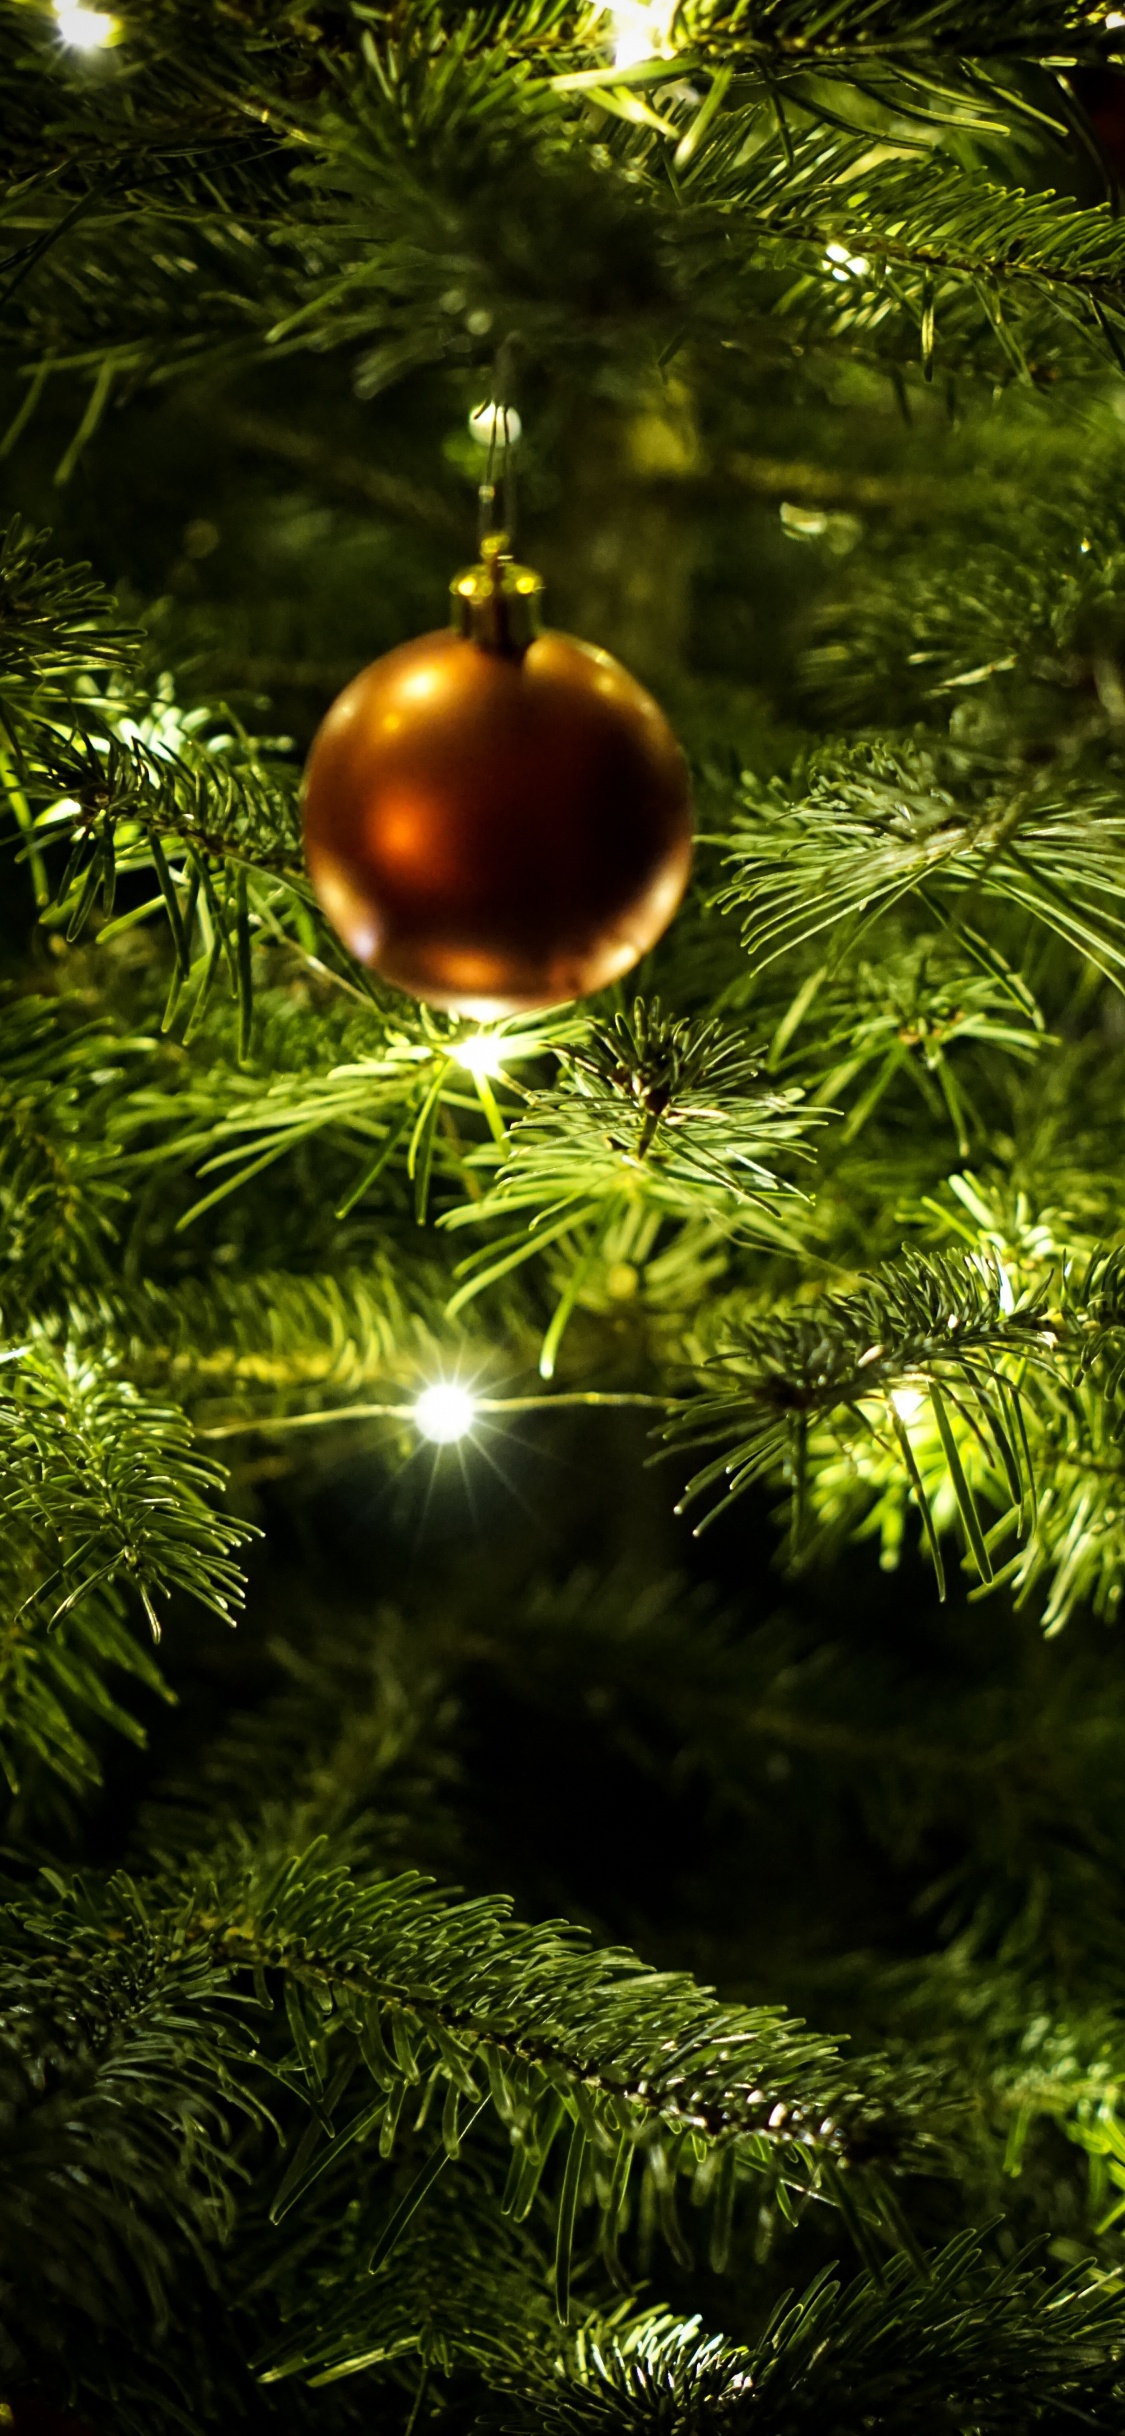 New Year, Christmas Day, Christmas Ornament, Christmas Decoration, Christmas Tree. Wallpaper in 1125x2436 Resolution